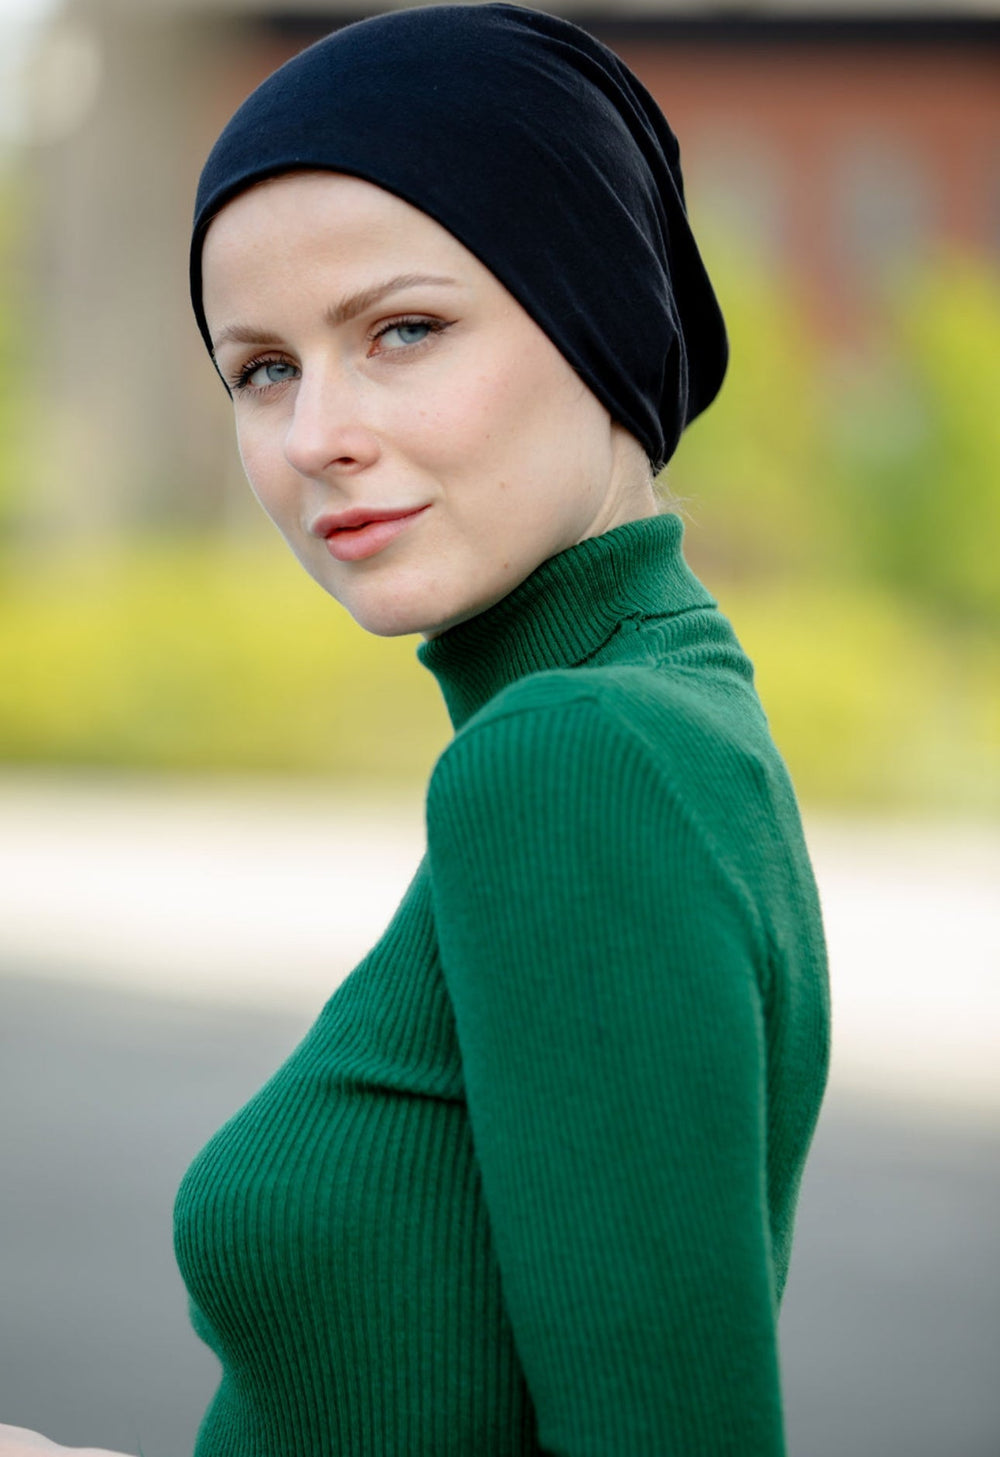 a woman wearing a green sweater and a black head scarf